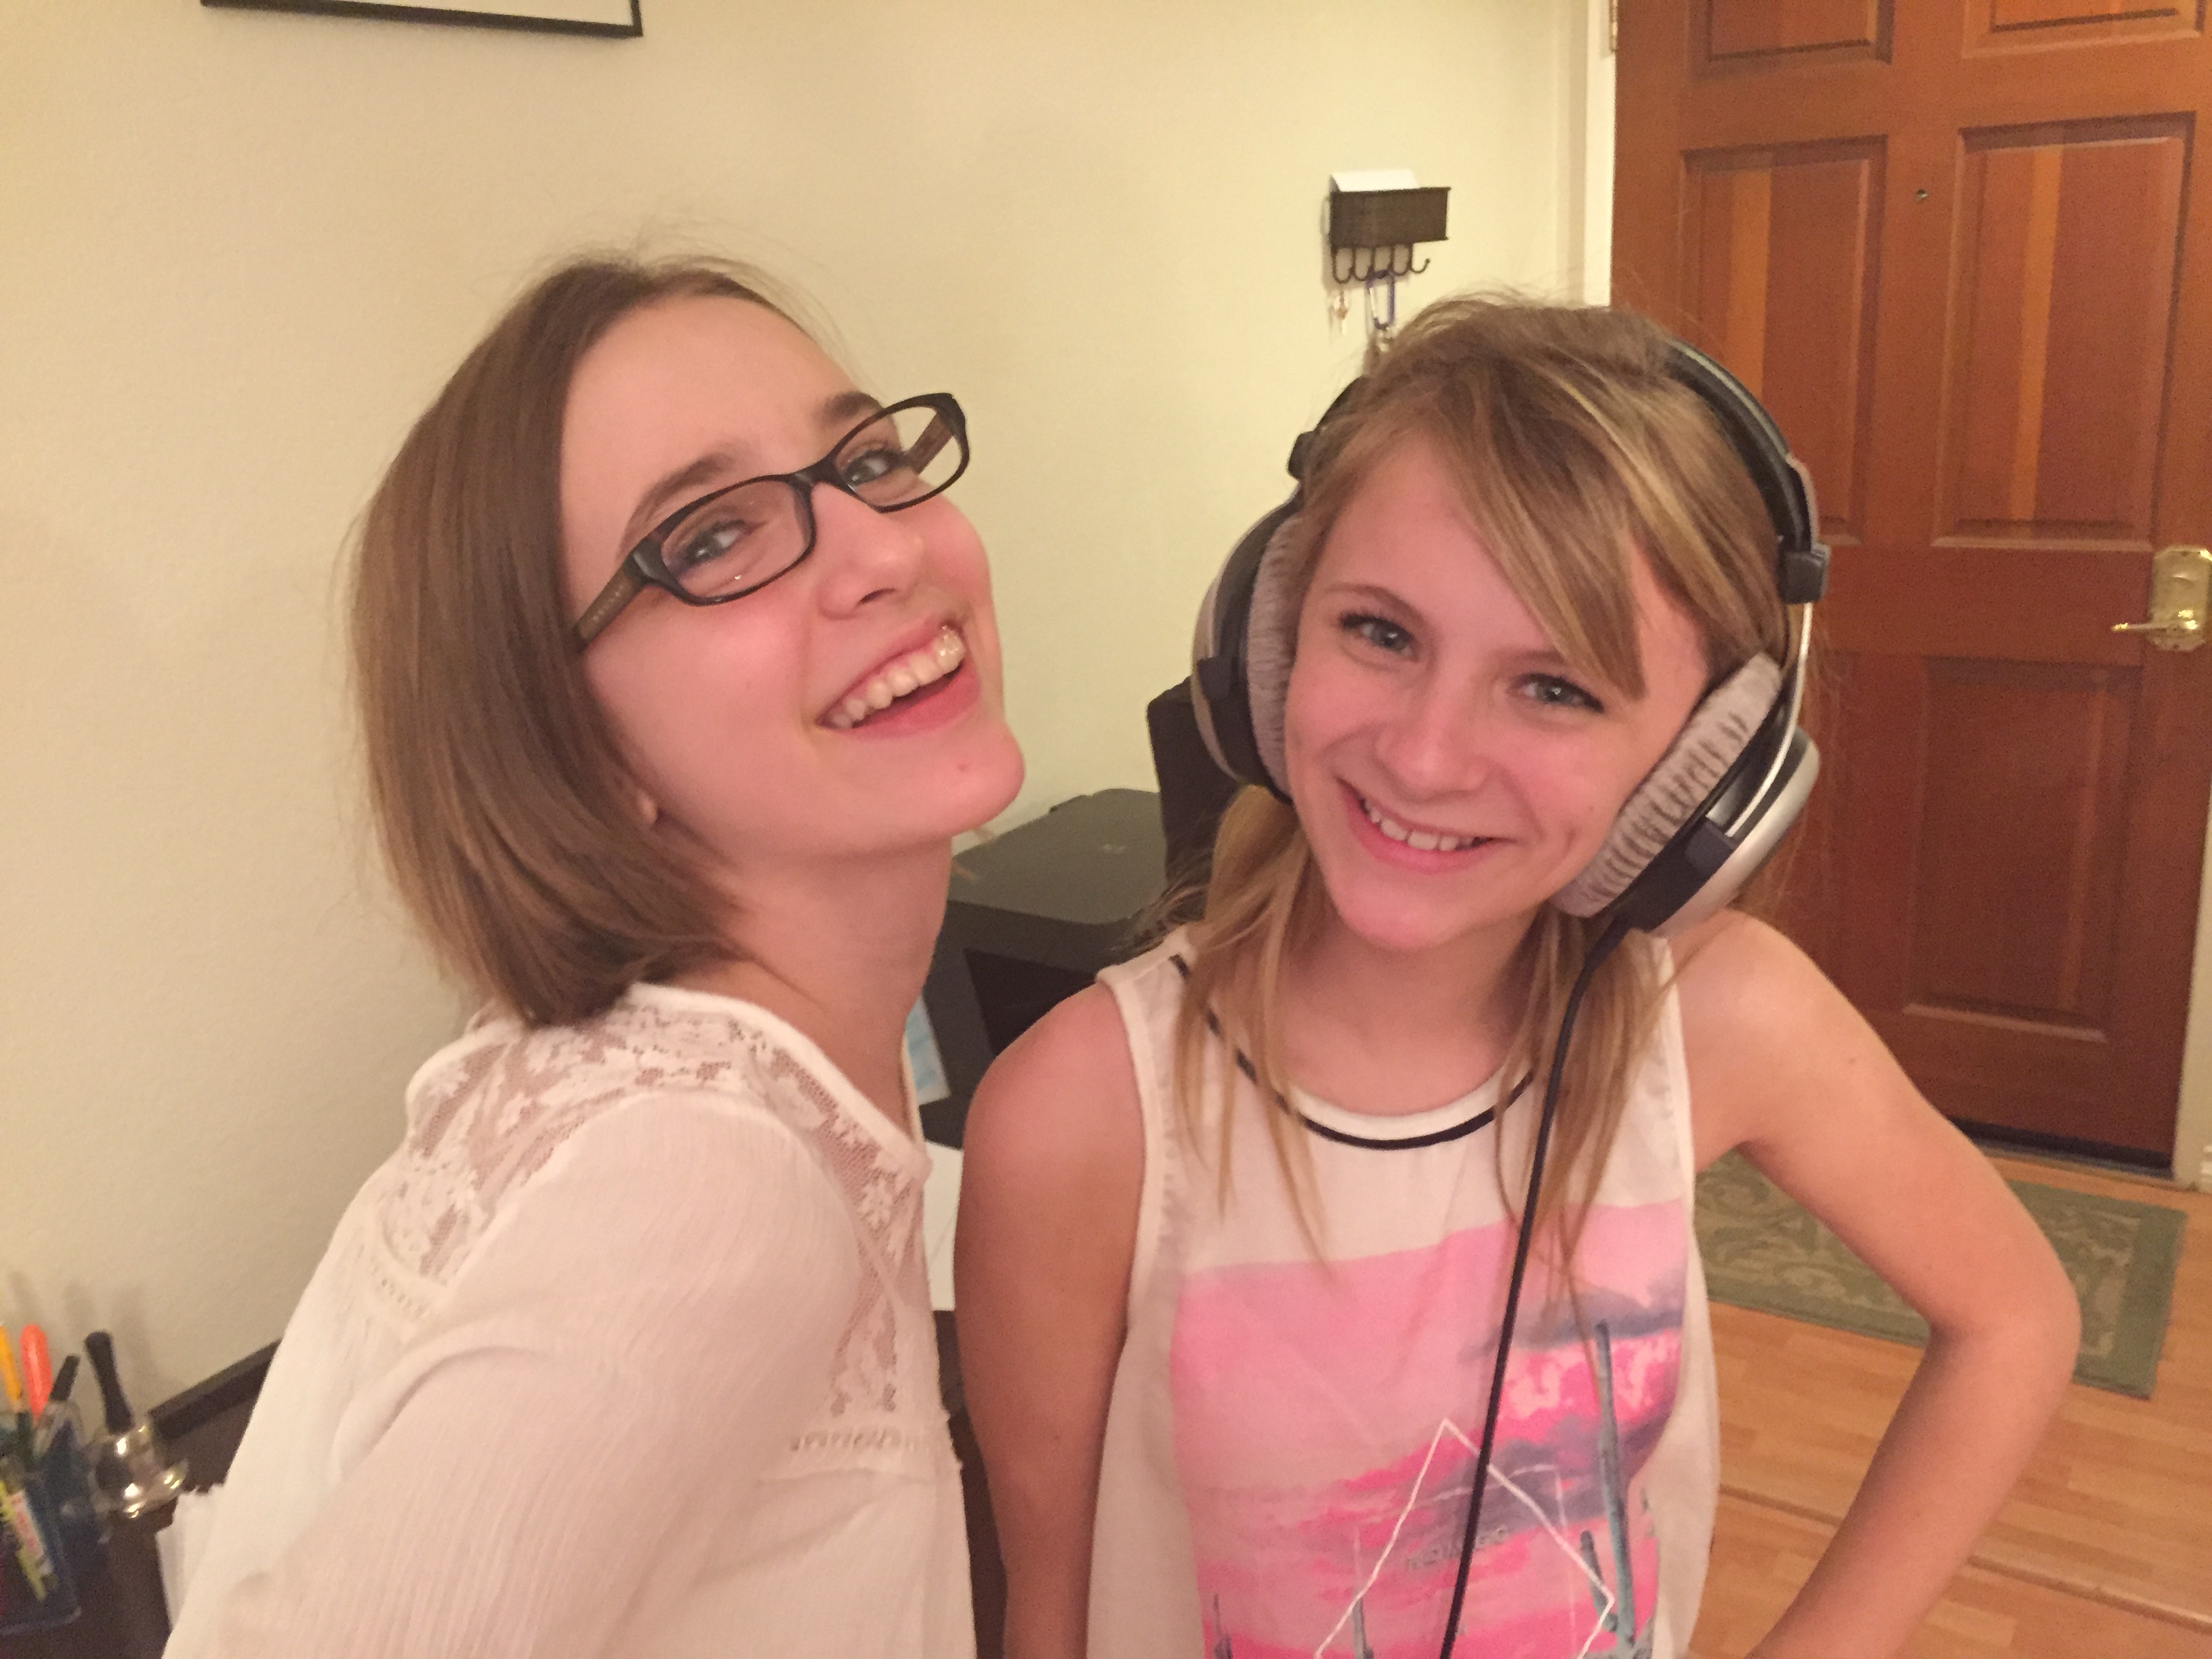 Jessie Finch (Director of Fashion Feline) and Brooke B. doing a Voice over.